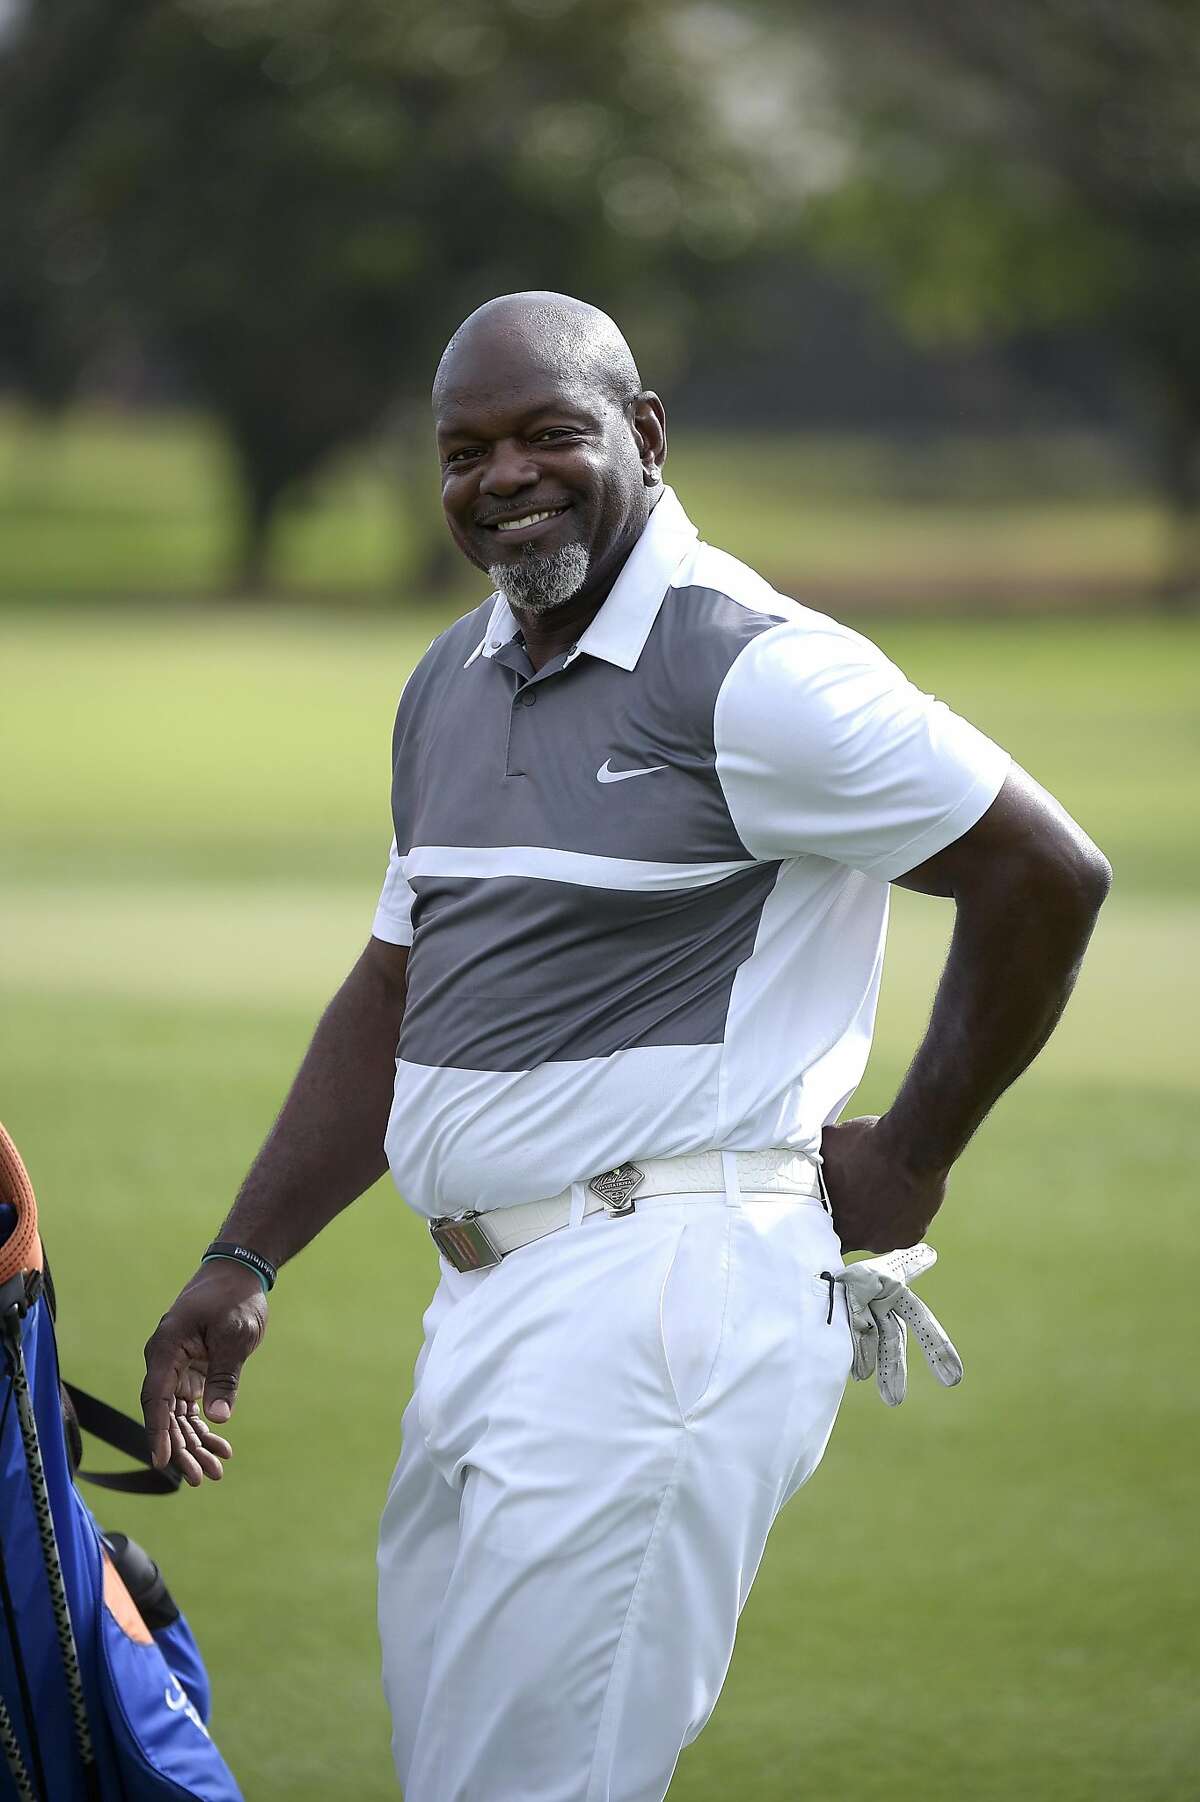 Former NFL running back Emmitt Smith is trying to expand his luxury men's grooming and lifestyle club in Houston. Continue to click to see the other celebrities who've targeted Texas in order to expand their businesses.